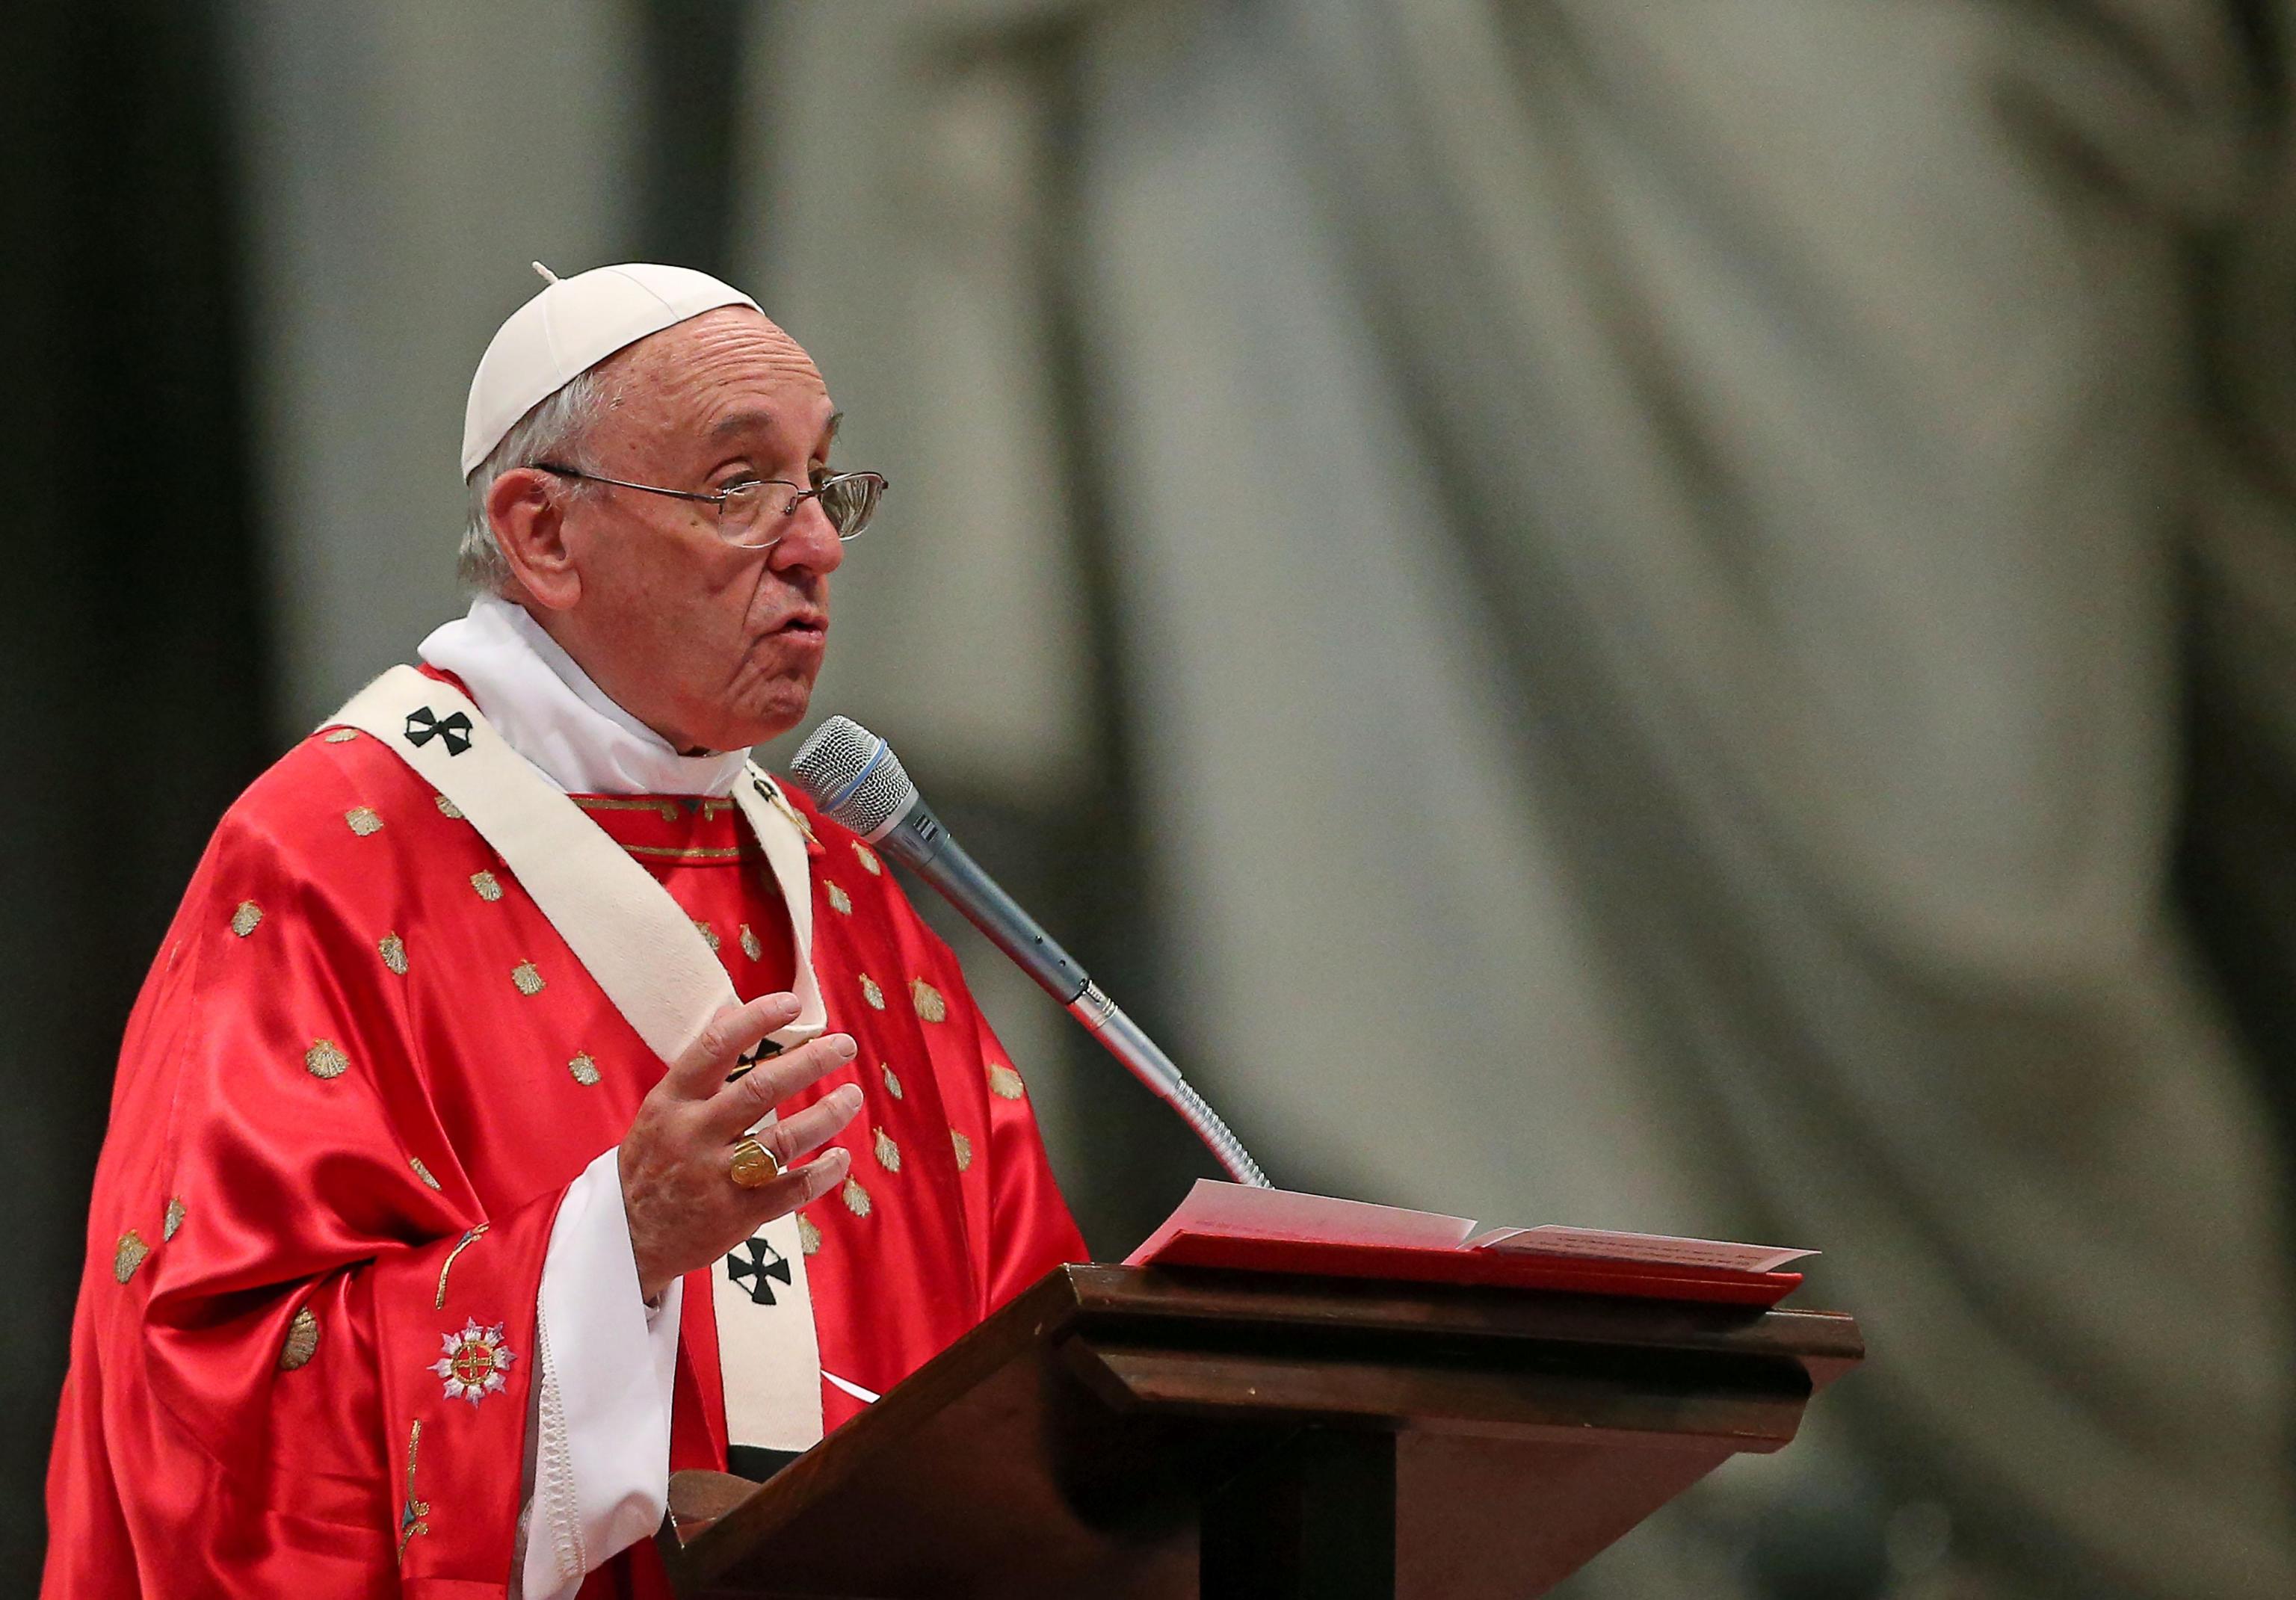 Pope Francis celebrates Pentecost Sunday in the St. Peter's Basilica in Rome